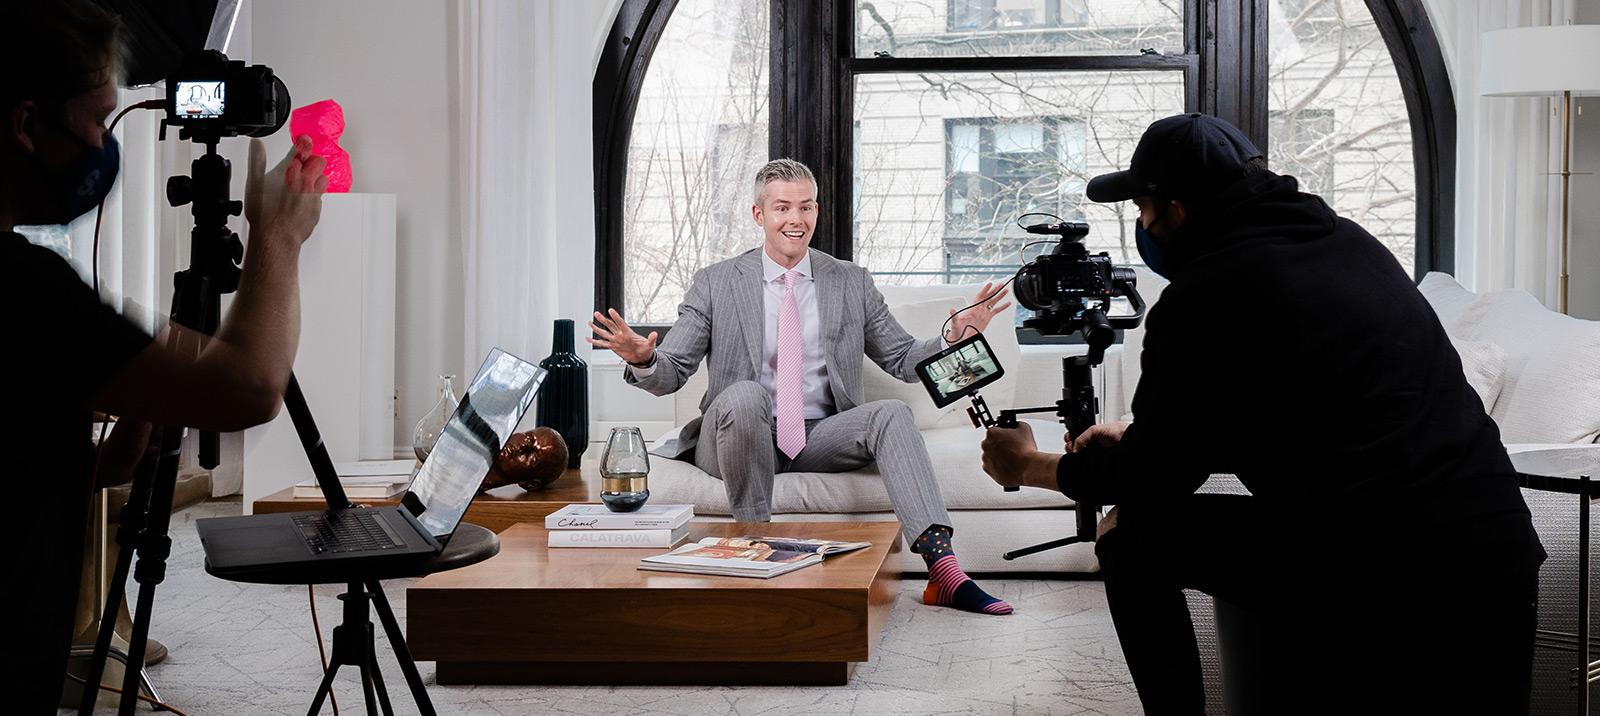 Ryan Serhant Personal Brand State For Real Estate Agents